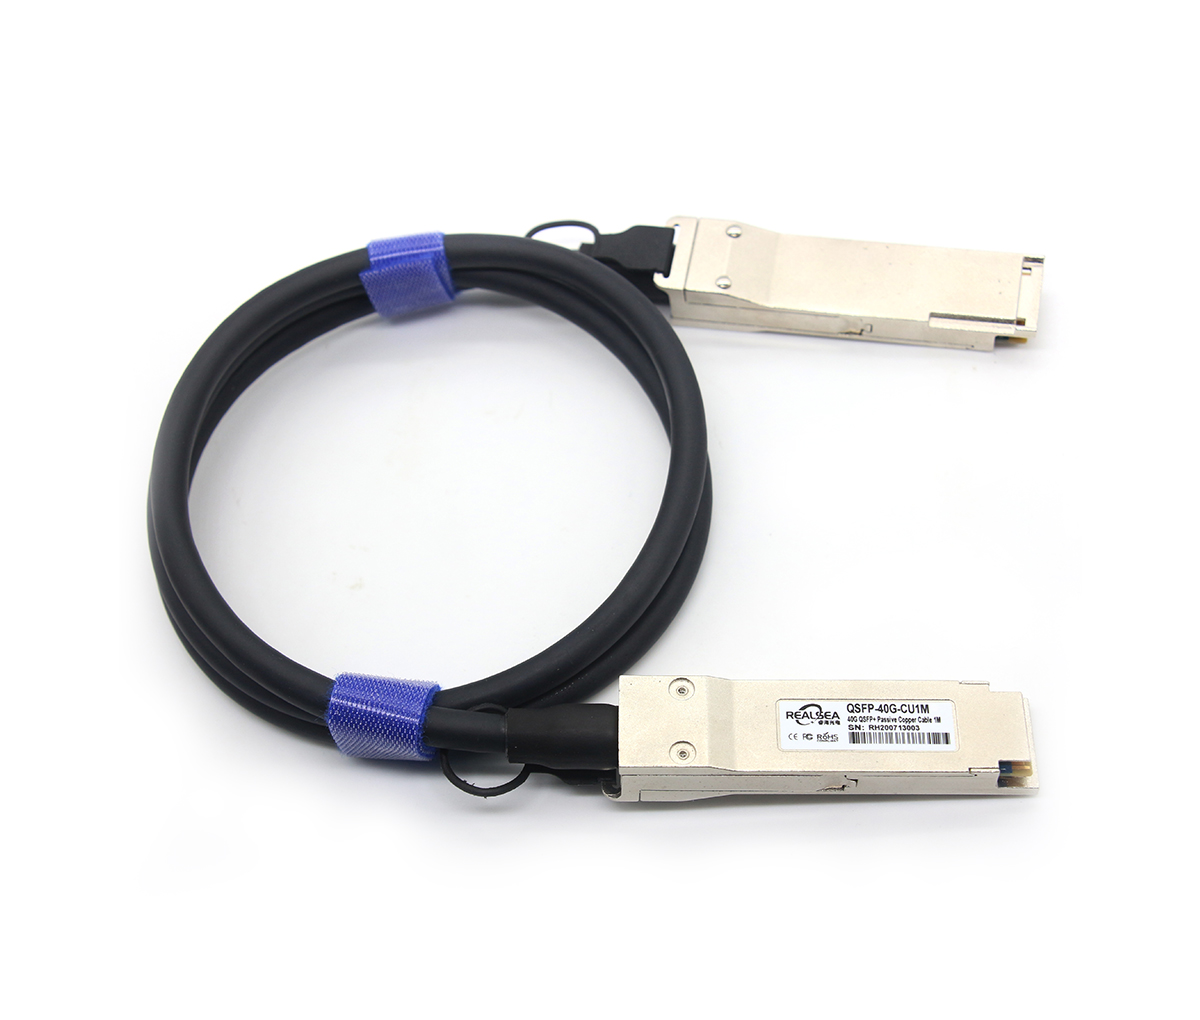 40G DAC Active Copper Cable